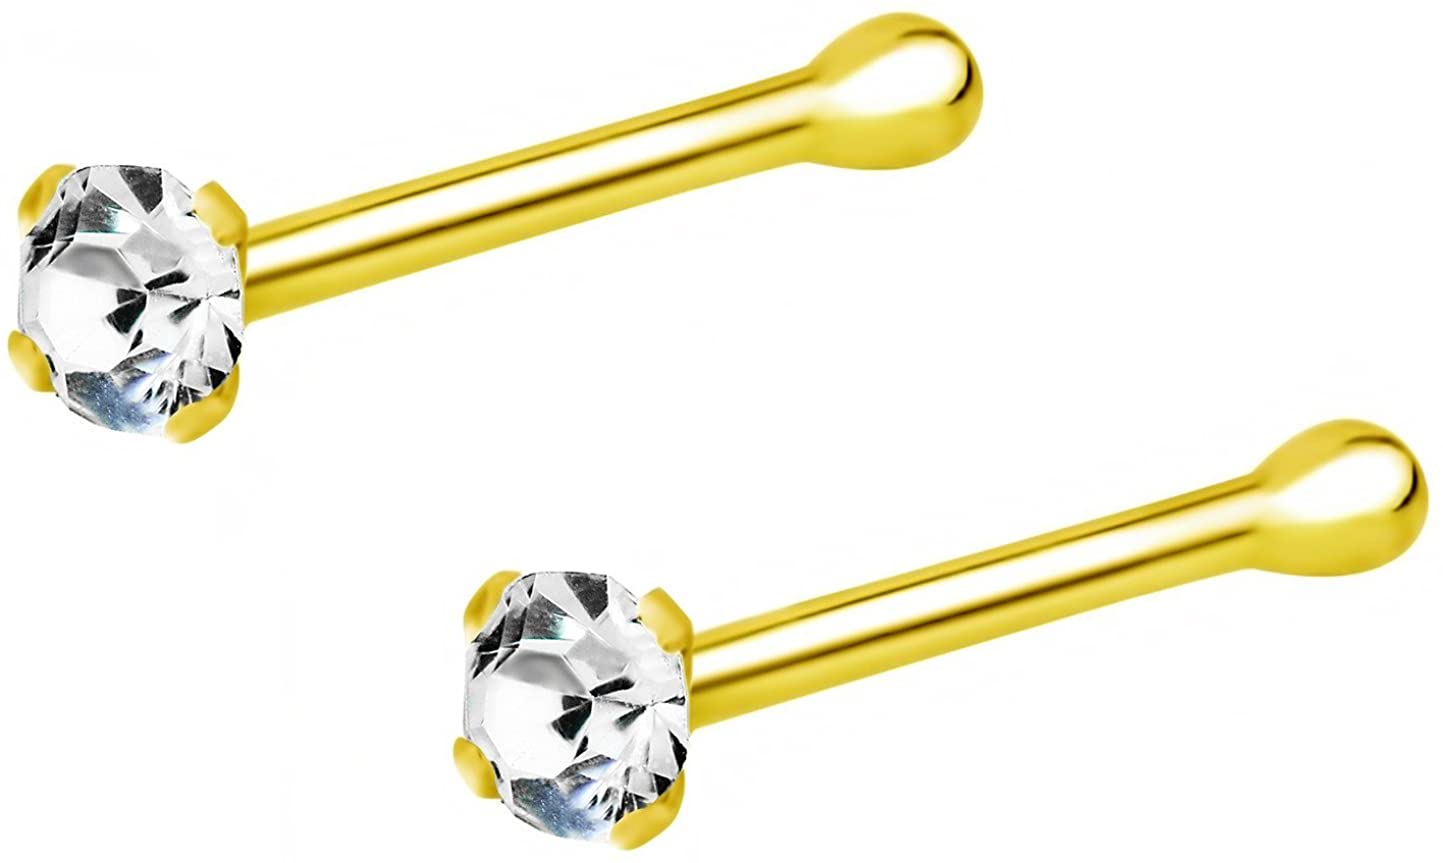 Forbidden Body Jewelry 22g 18k Gold Plated Sterling Silver CZ Simulated Diamond Micro Nose Stud 1.5mm 